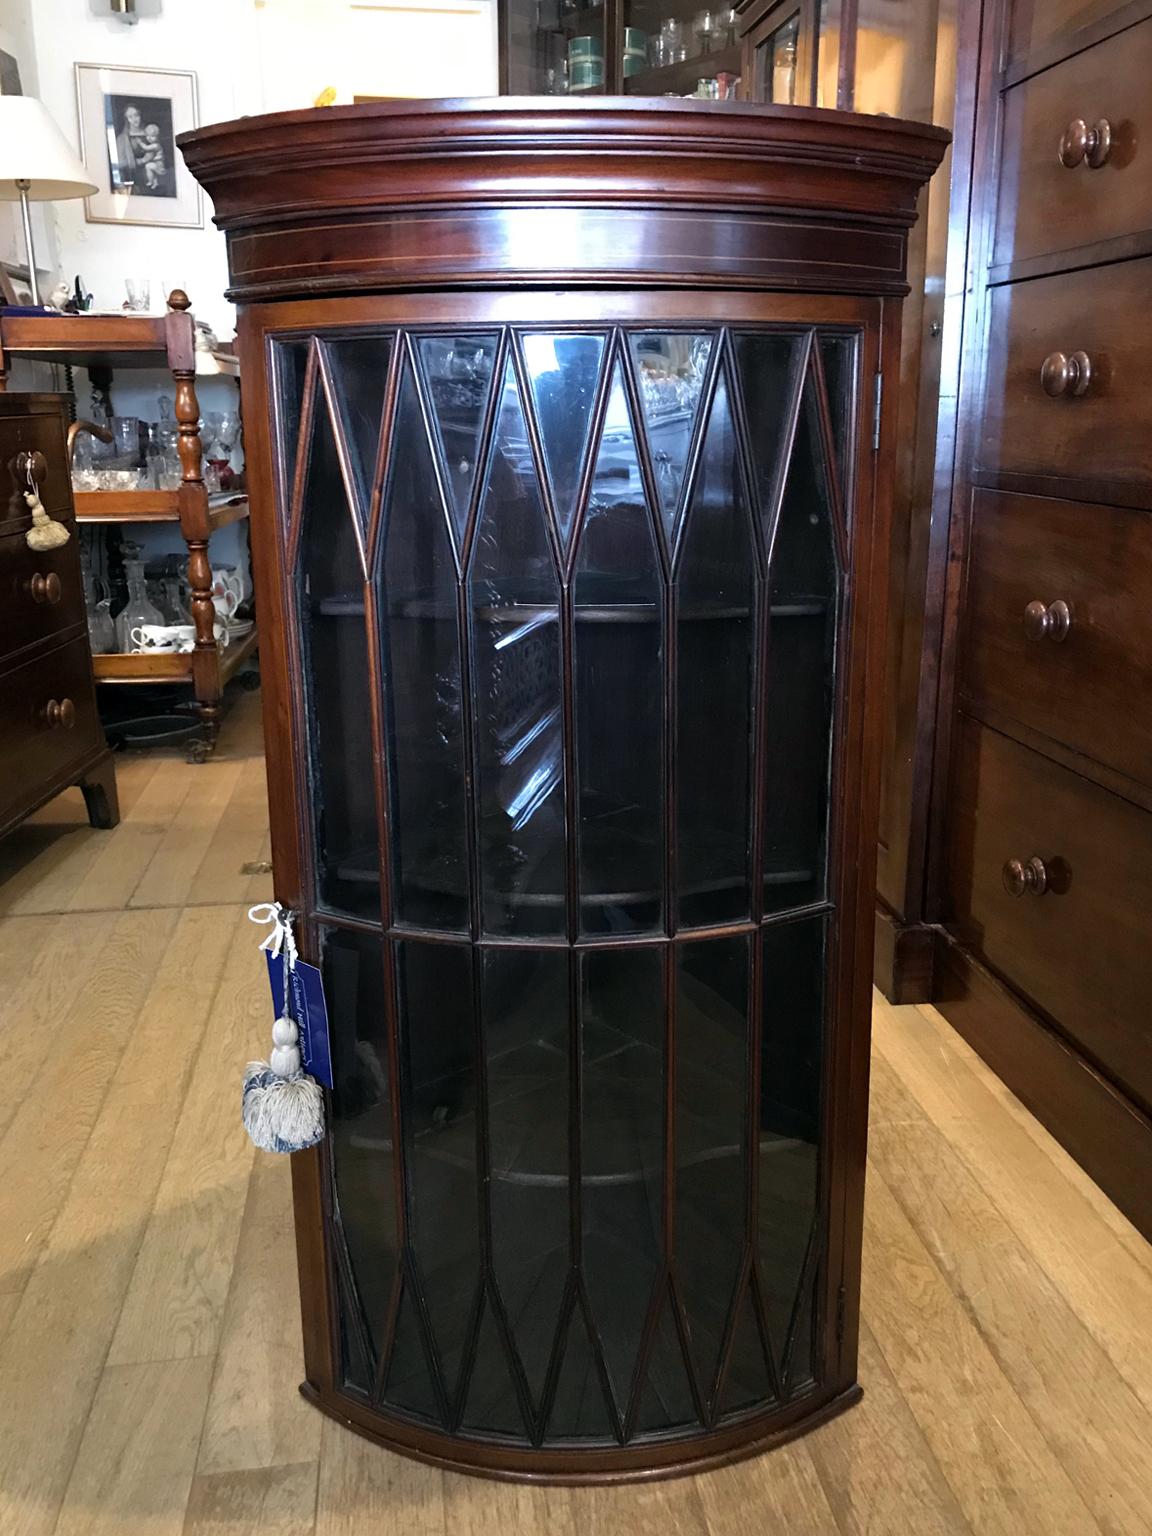 Early Edwardian mahogany inlaid bow shaped hanging corner cupboard with original astral glass and four shelves on the inside,

circa 1900.

Dimensions:
Height 40 inches - 102 cms
Sides 15 inches - 38 cms.

 